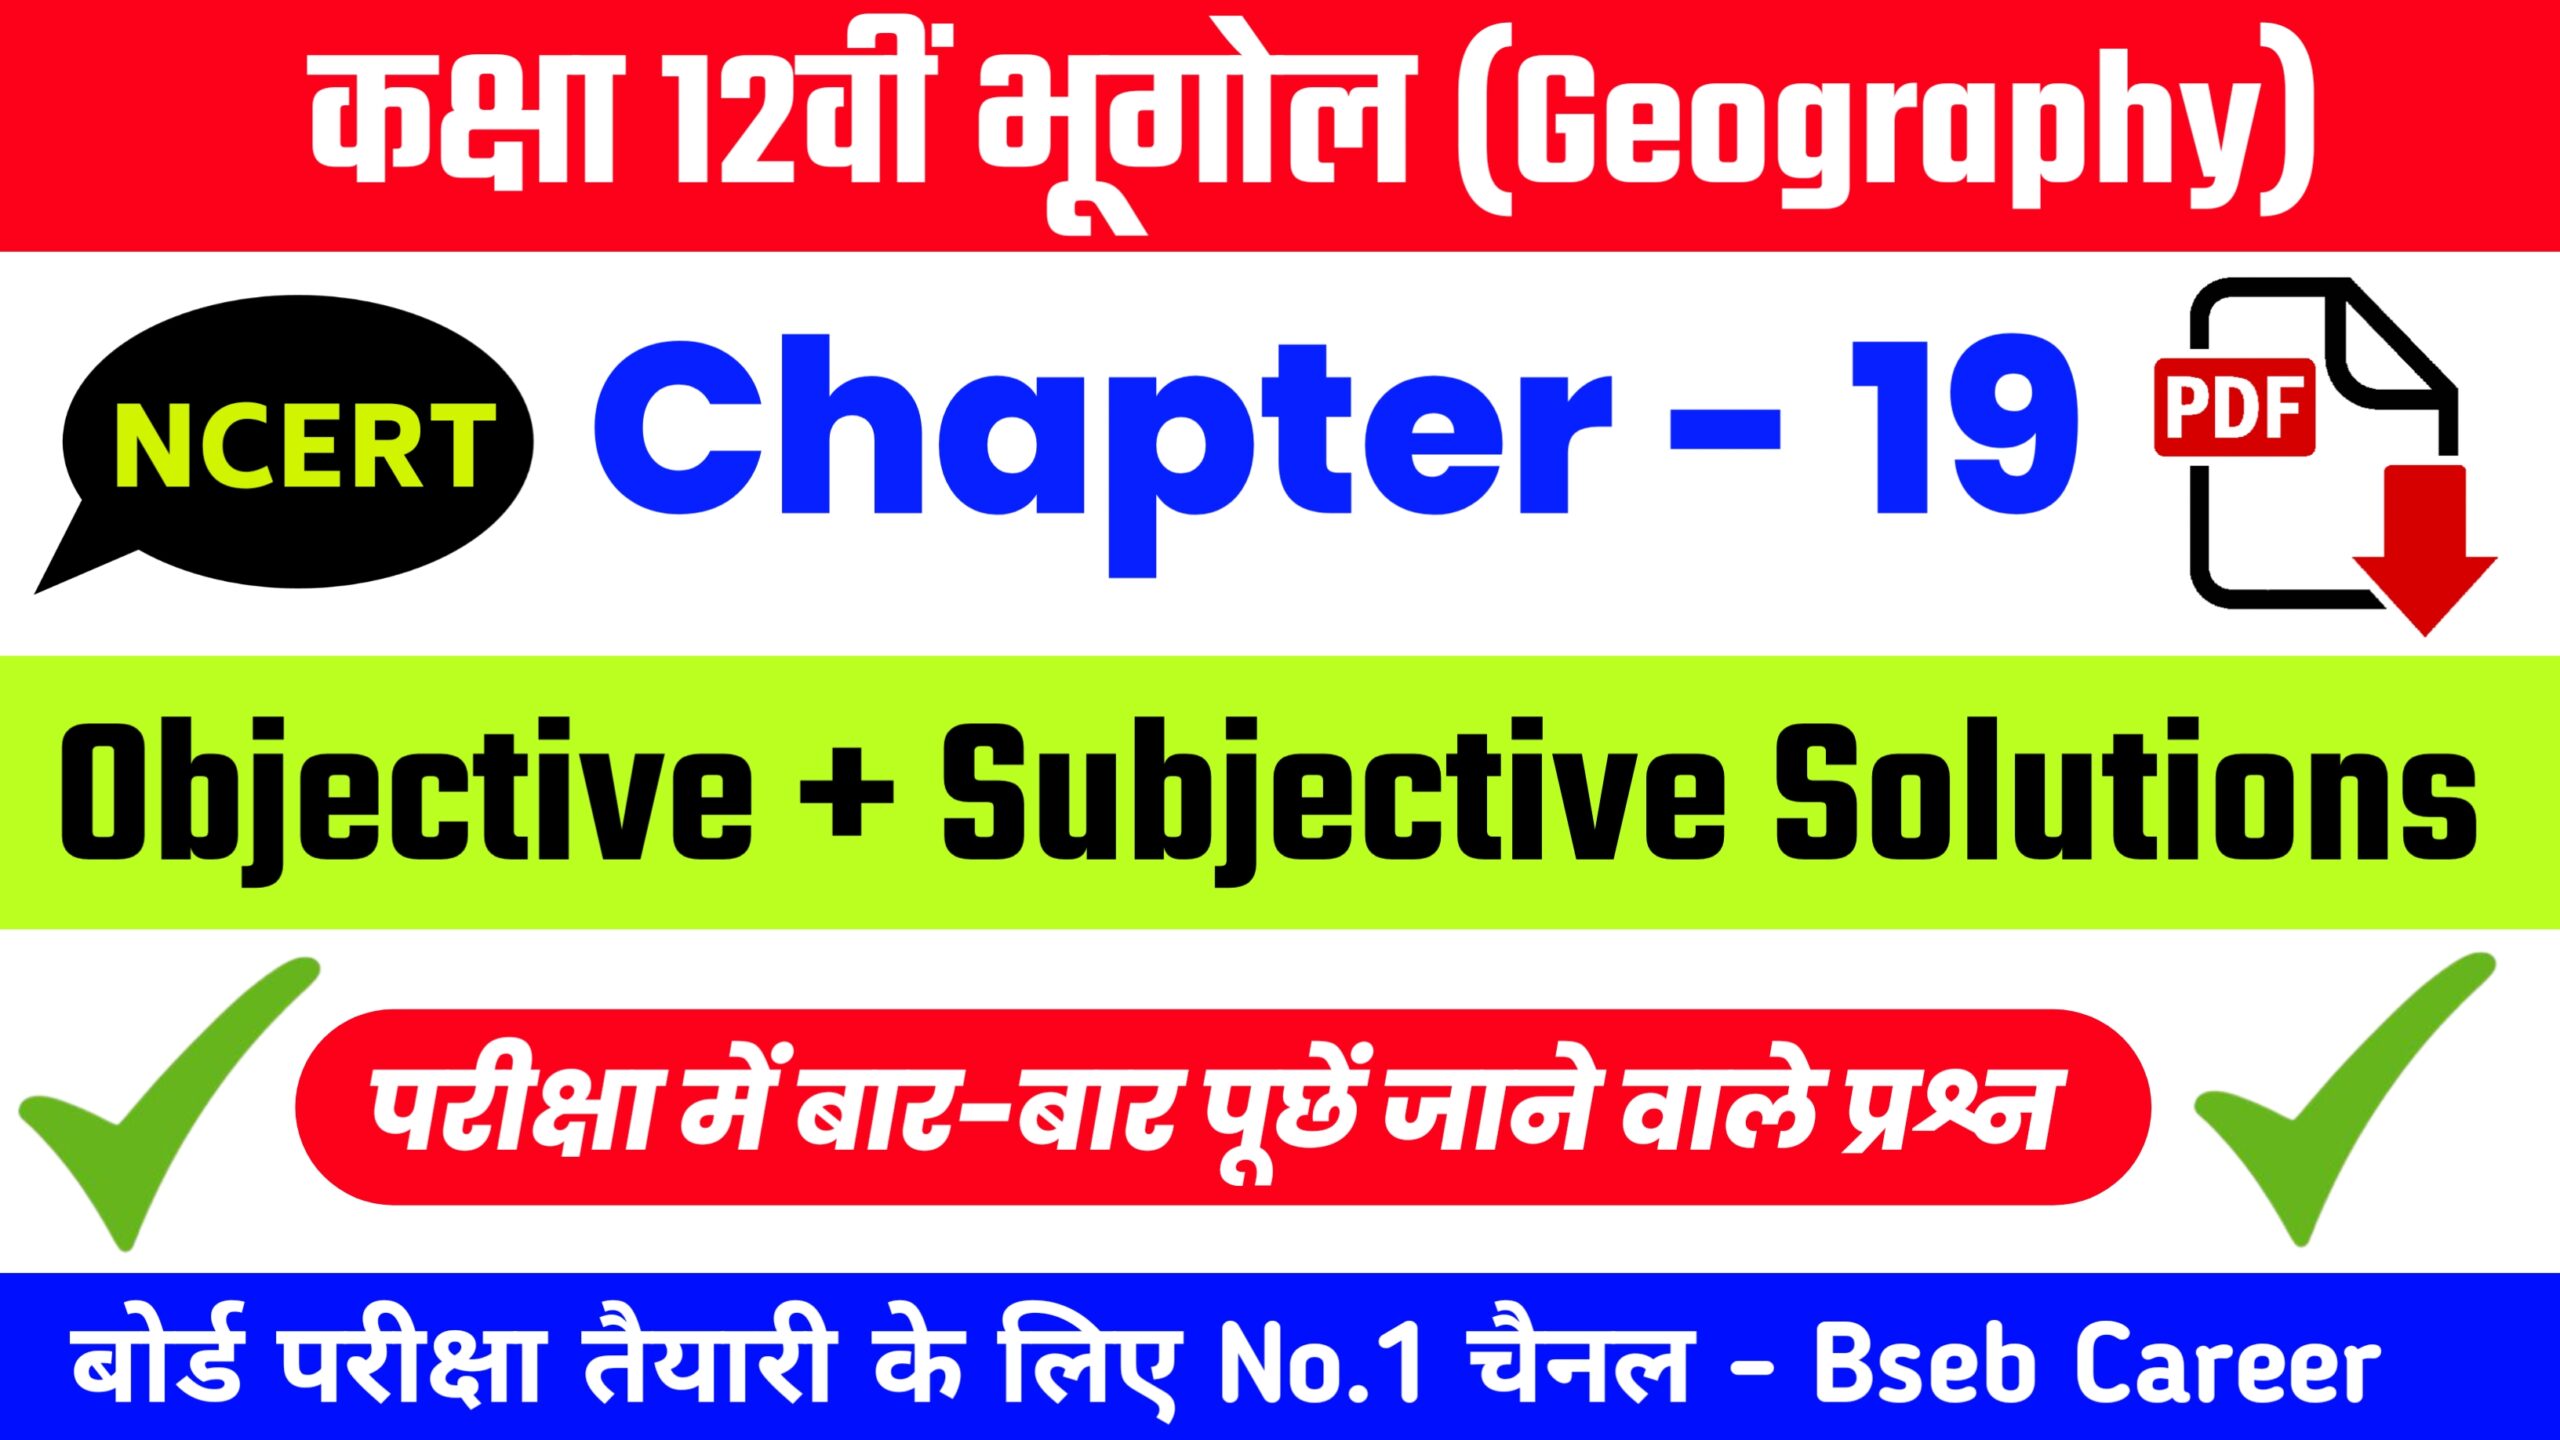 Class 12th Geography Chapter 19